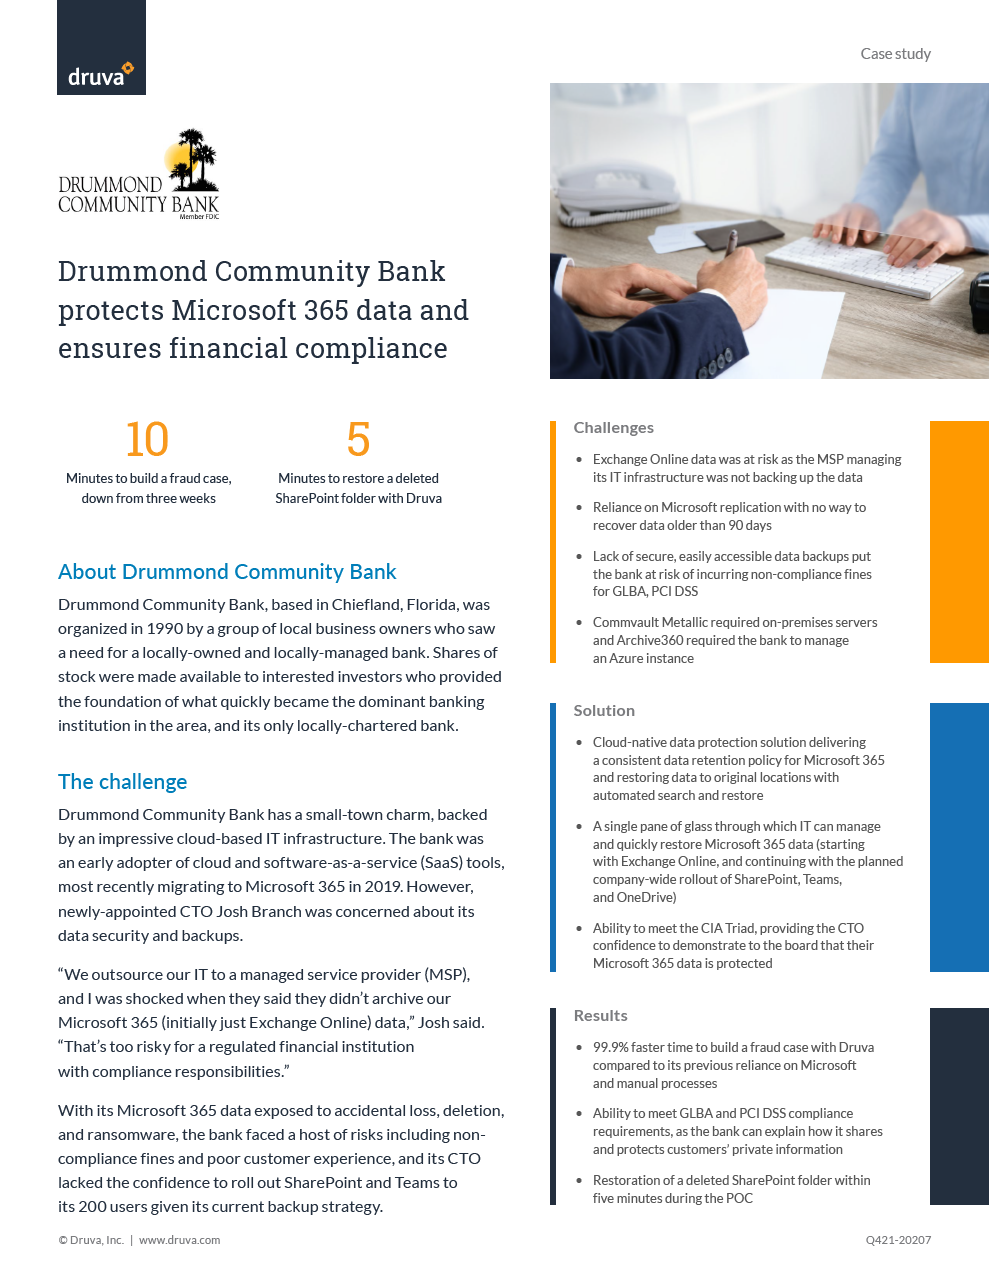 Drummond Community Bank protects Microsoft 365 data and ensures compliance with financial regulations